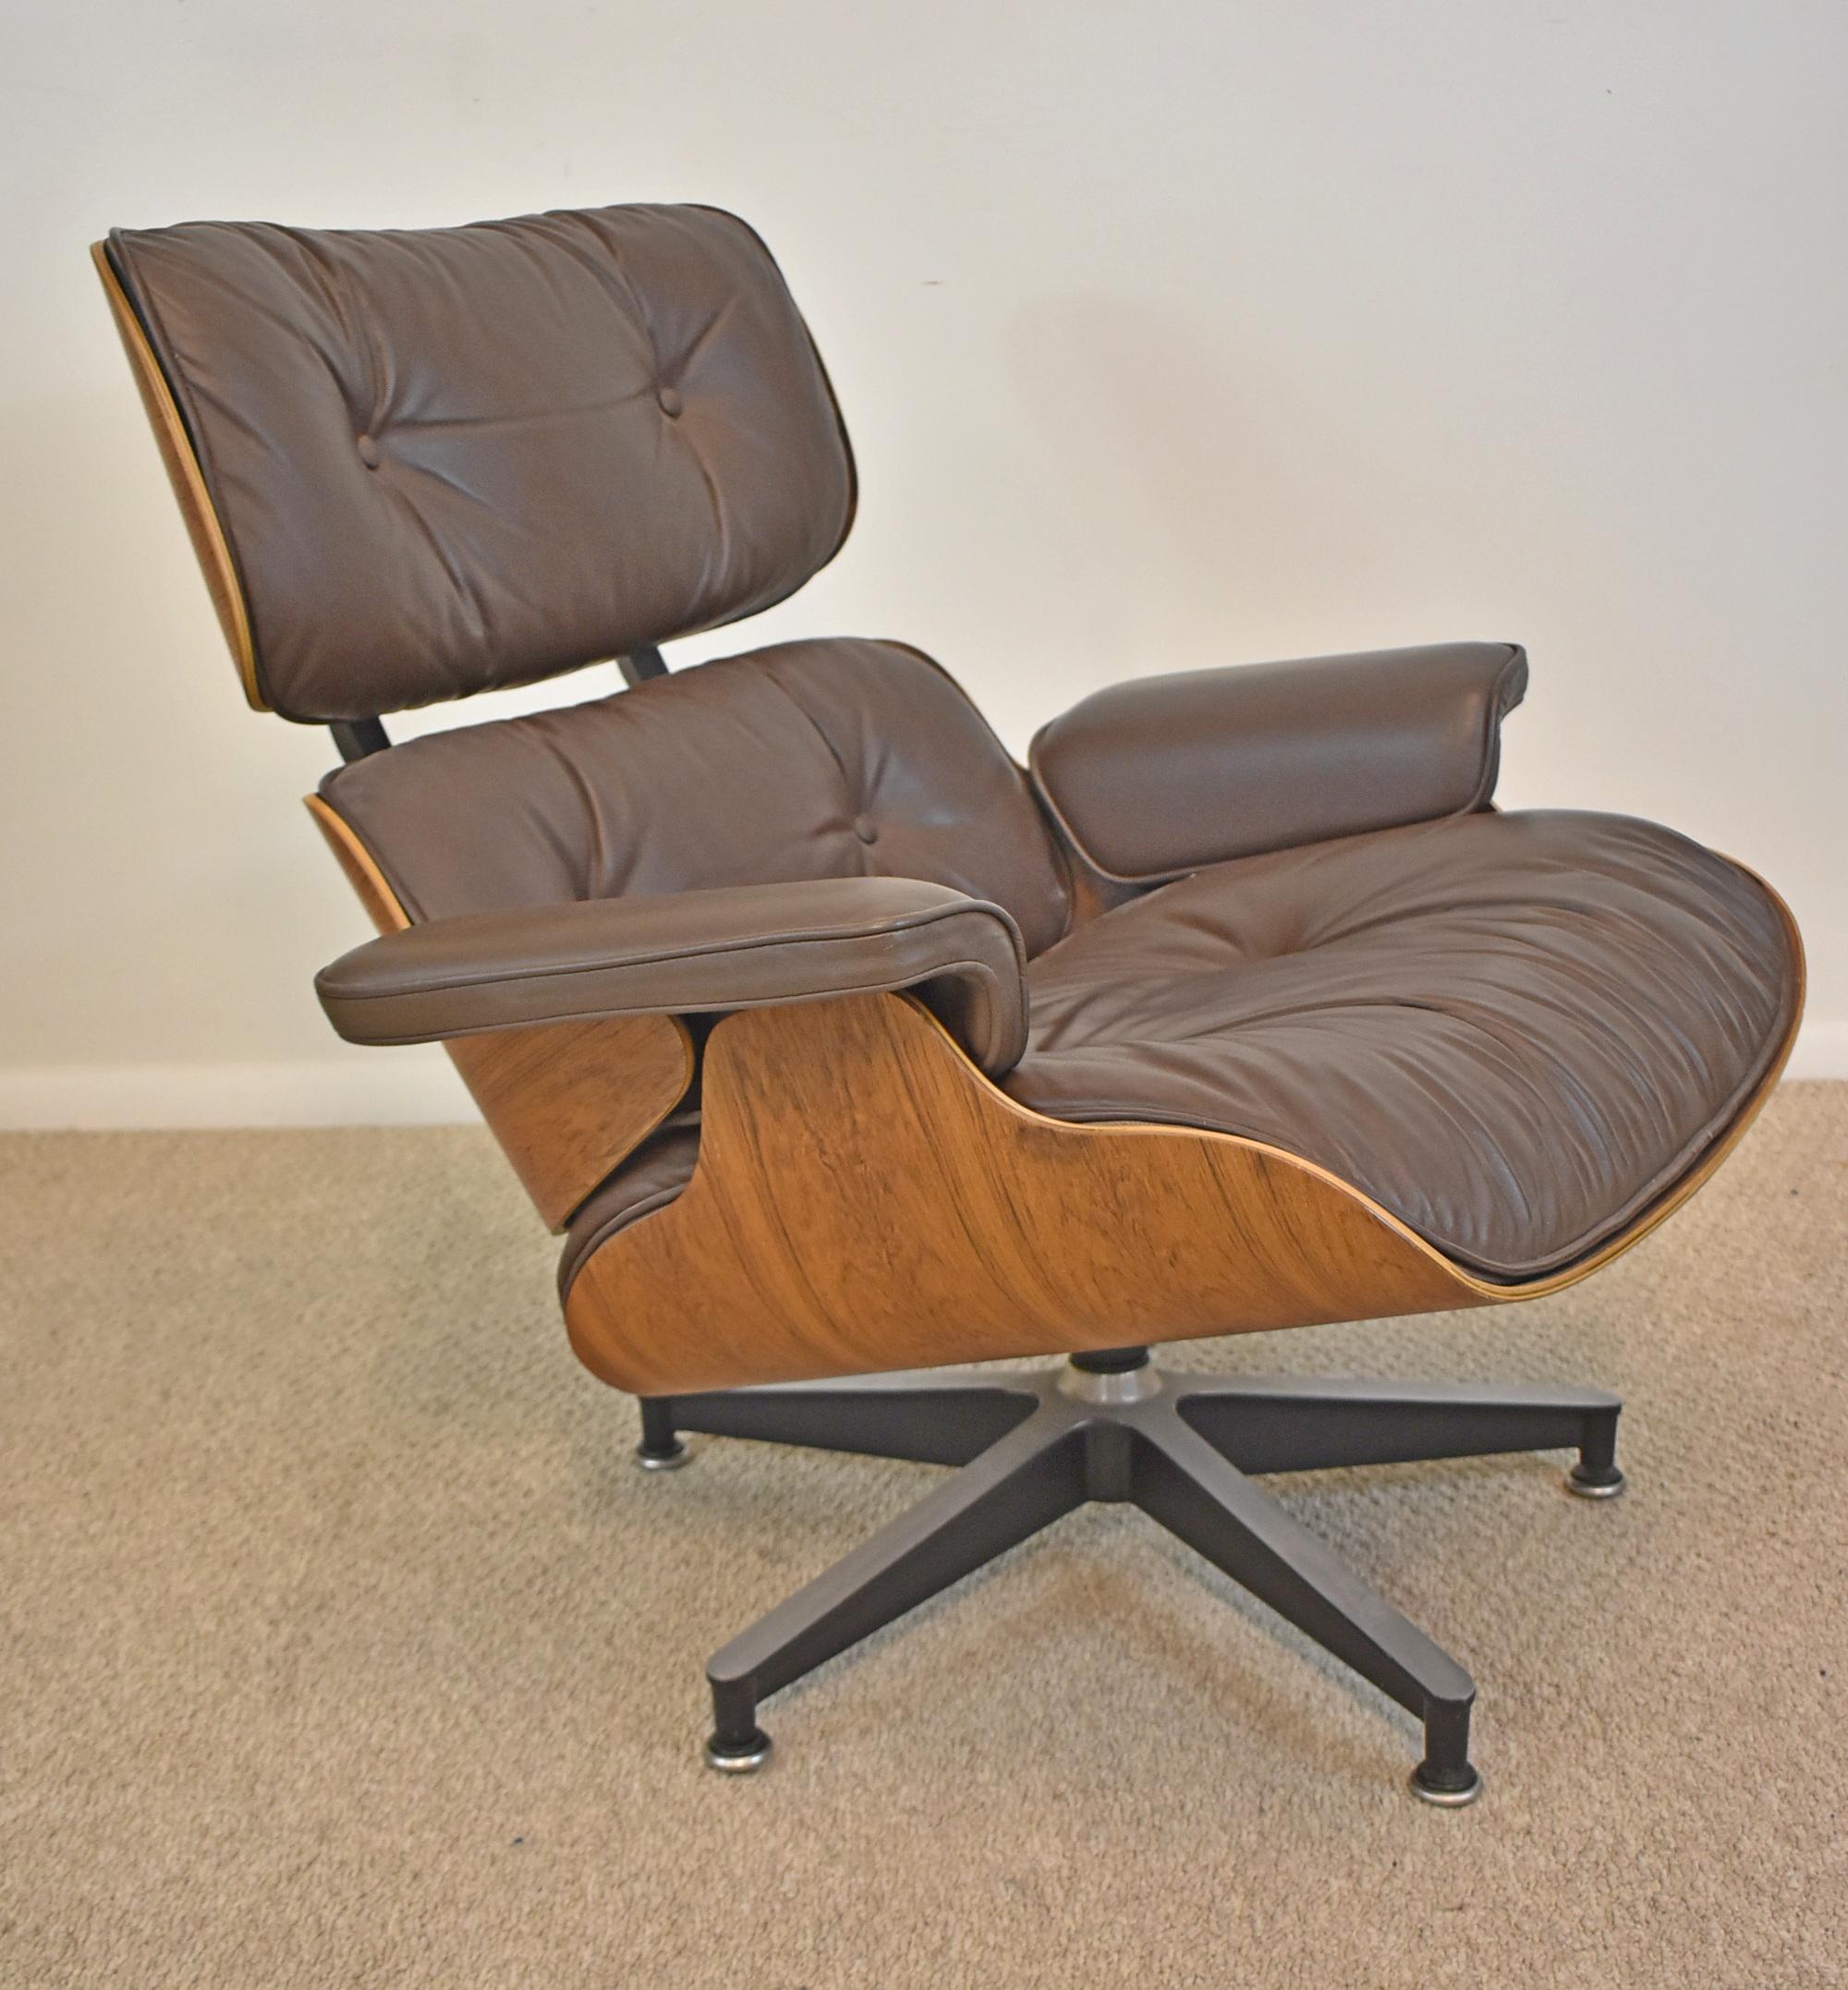 Herman Miller Eames Lounge chair & ottoman in Rosewood. Eames chair and Ottoman. Original finish Rosewood and Brown Leather. Great condition. Built in 1980s as per tag. Marked with Herman Miller logo. Dimensions: 34